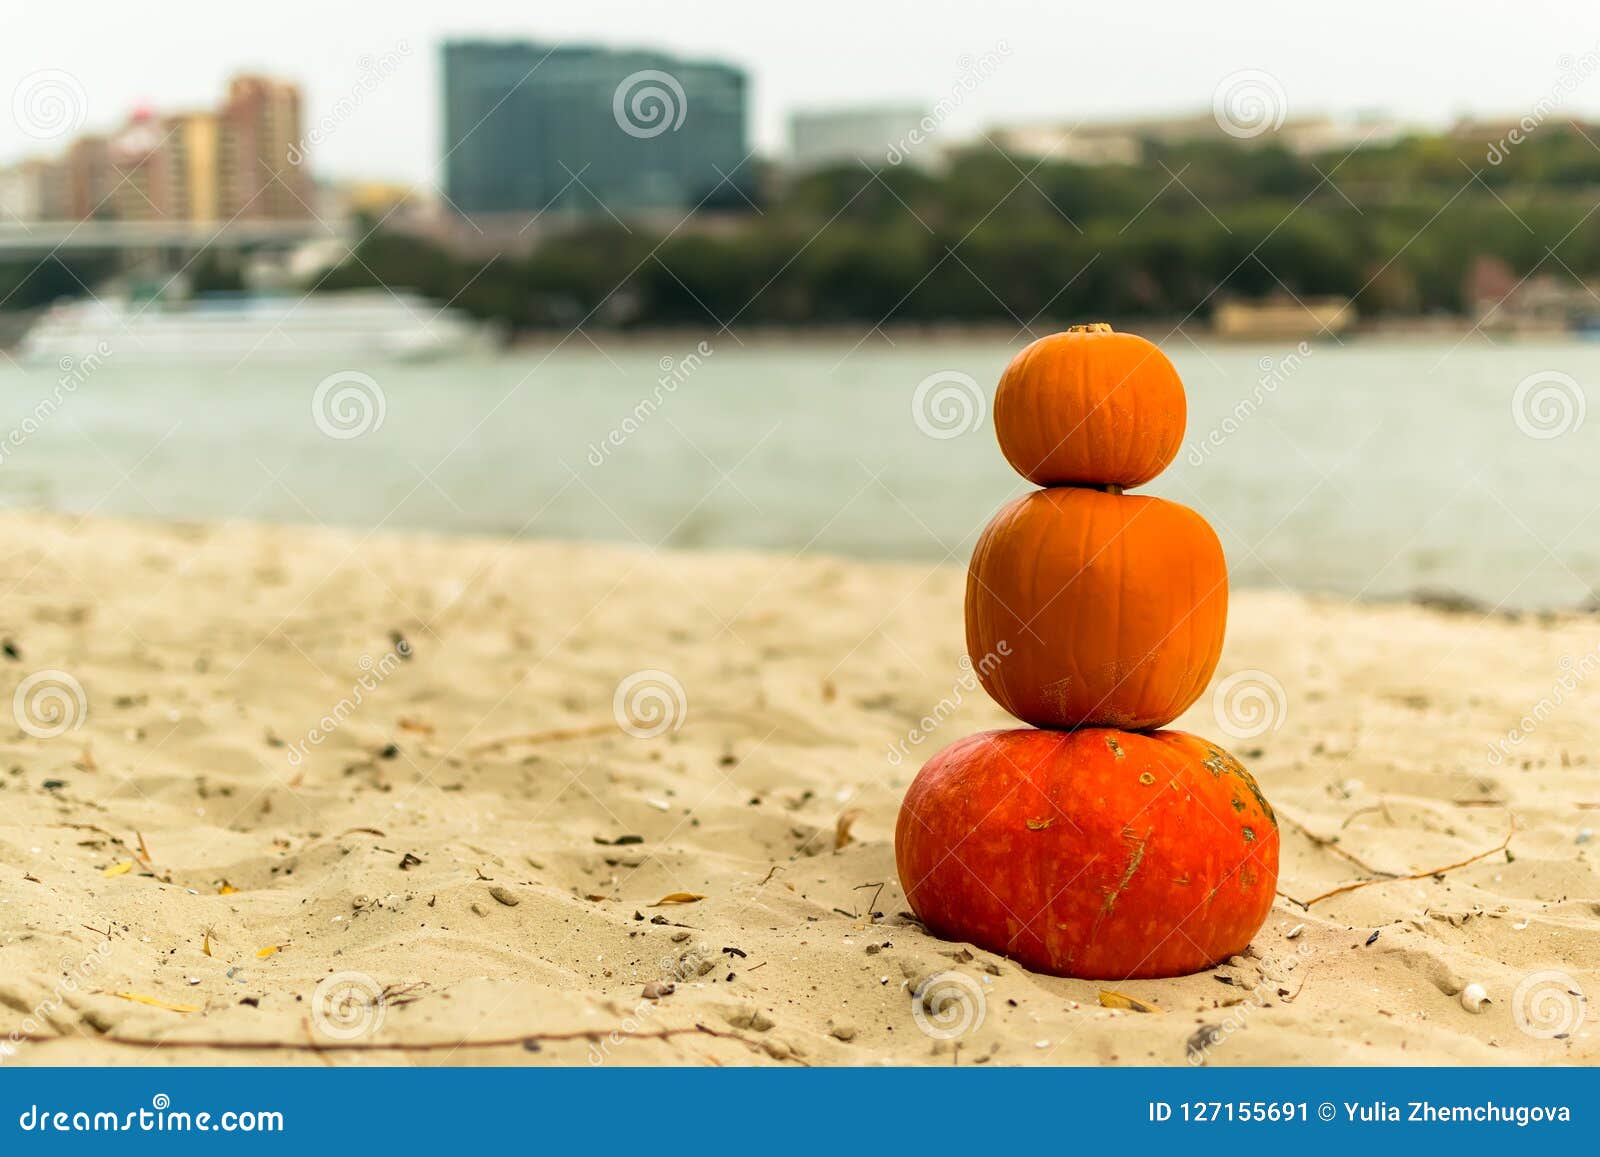 pumpkin in nature. autumn holiday harvest festival halloween. day of the dead. hallowmas